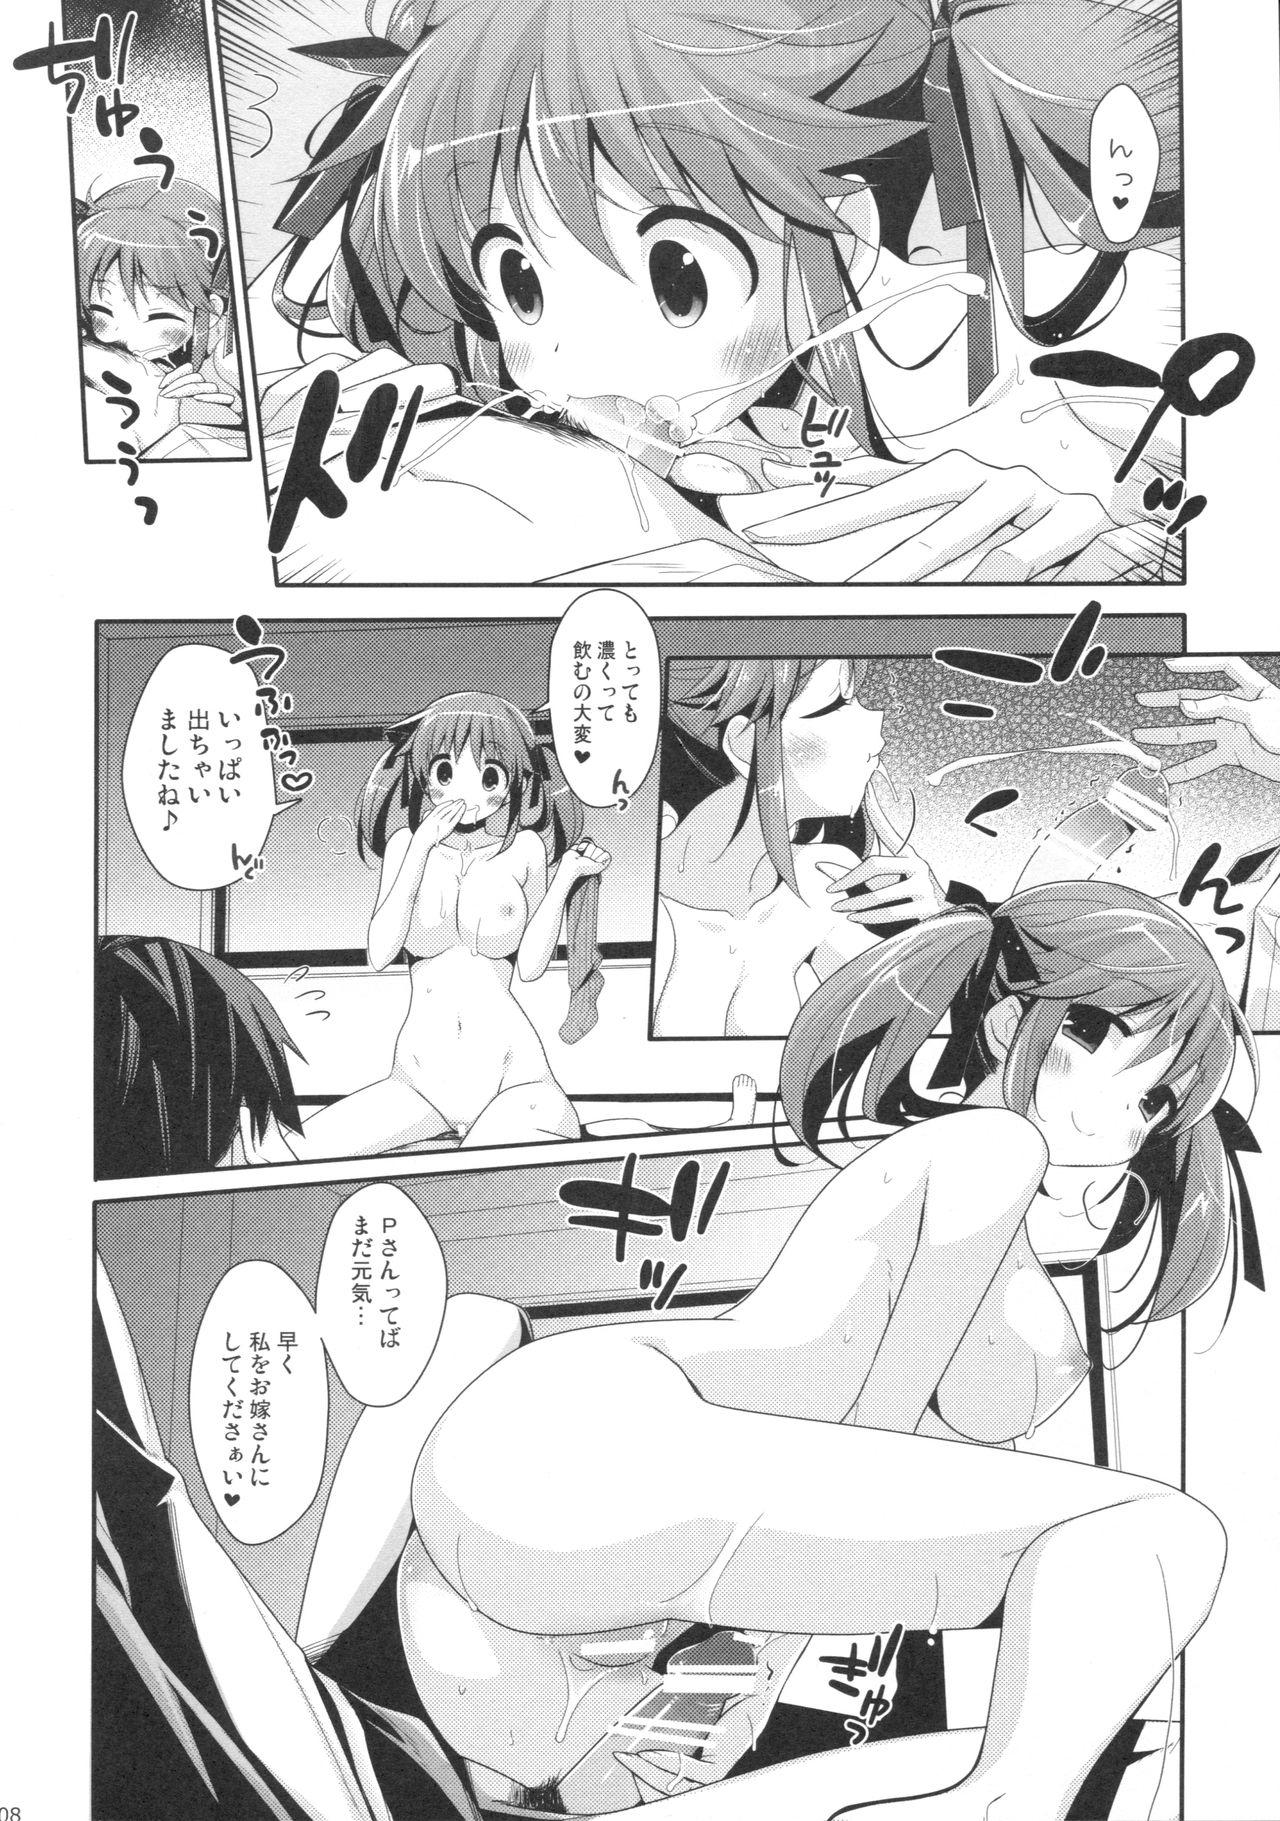 Exposed ROYAL x SWEET ANNIVERS@RY - The idolmaster Gang - Page 7